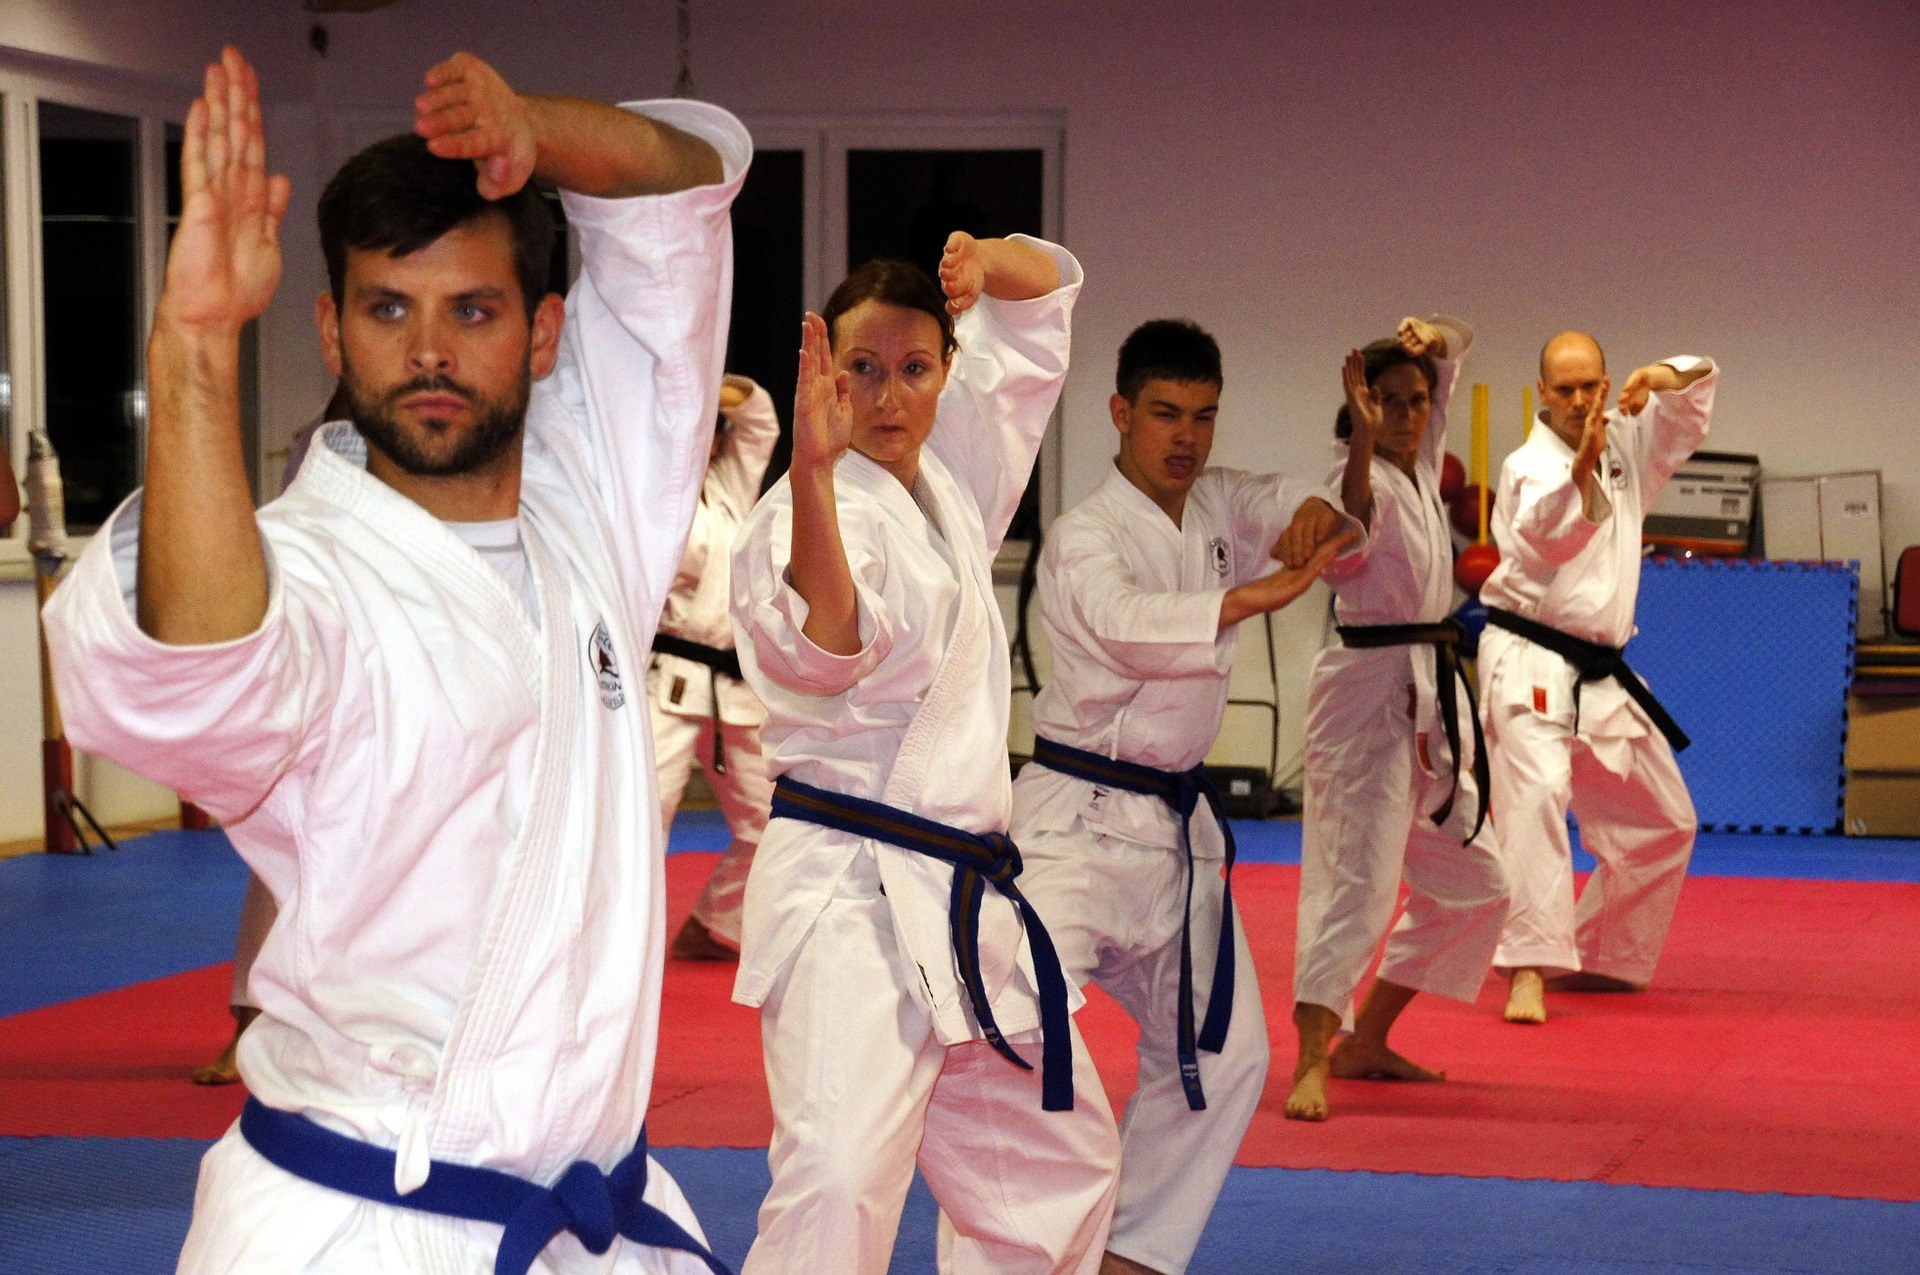 Check our Quick and Practical Guide on Karate Lessons!